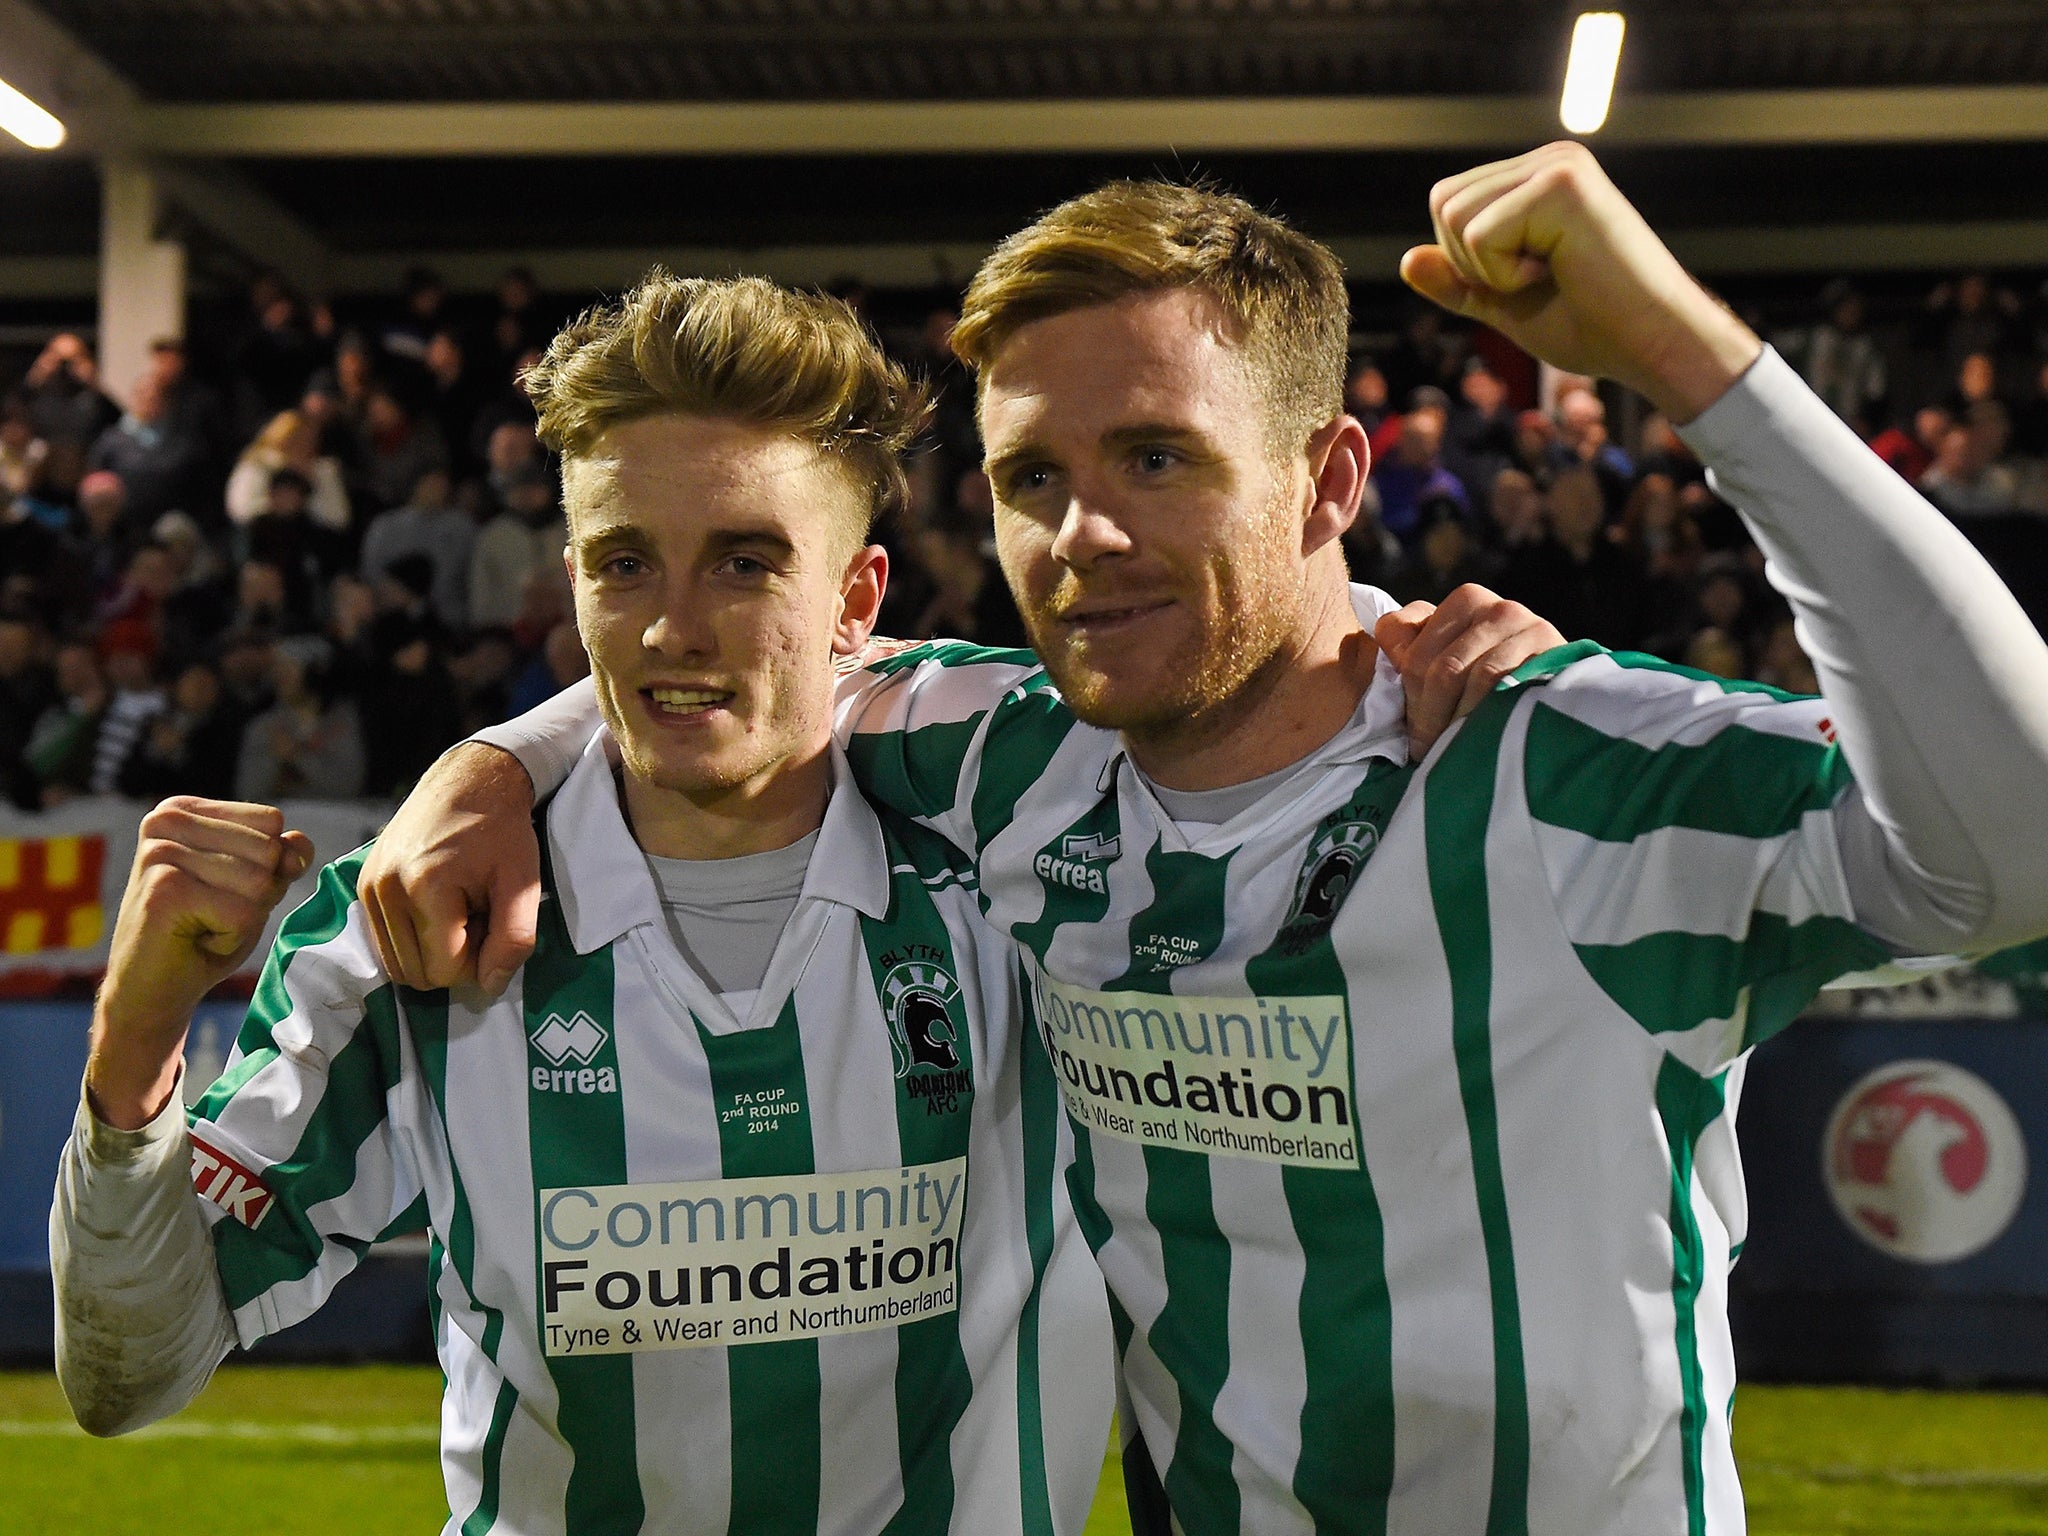 Scorer Jarrett Rivers (left) and Stephen Turnbull, of Blyth Spartans, celebrate victory after
their second round match against Hartlepool United last month